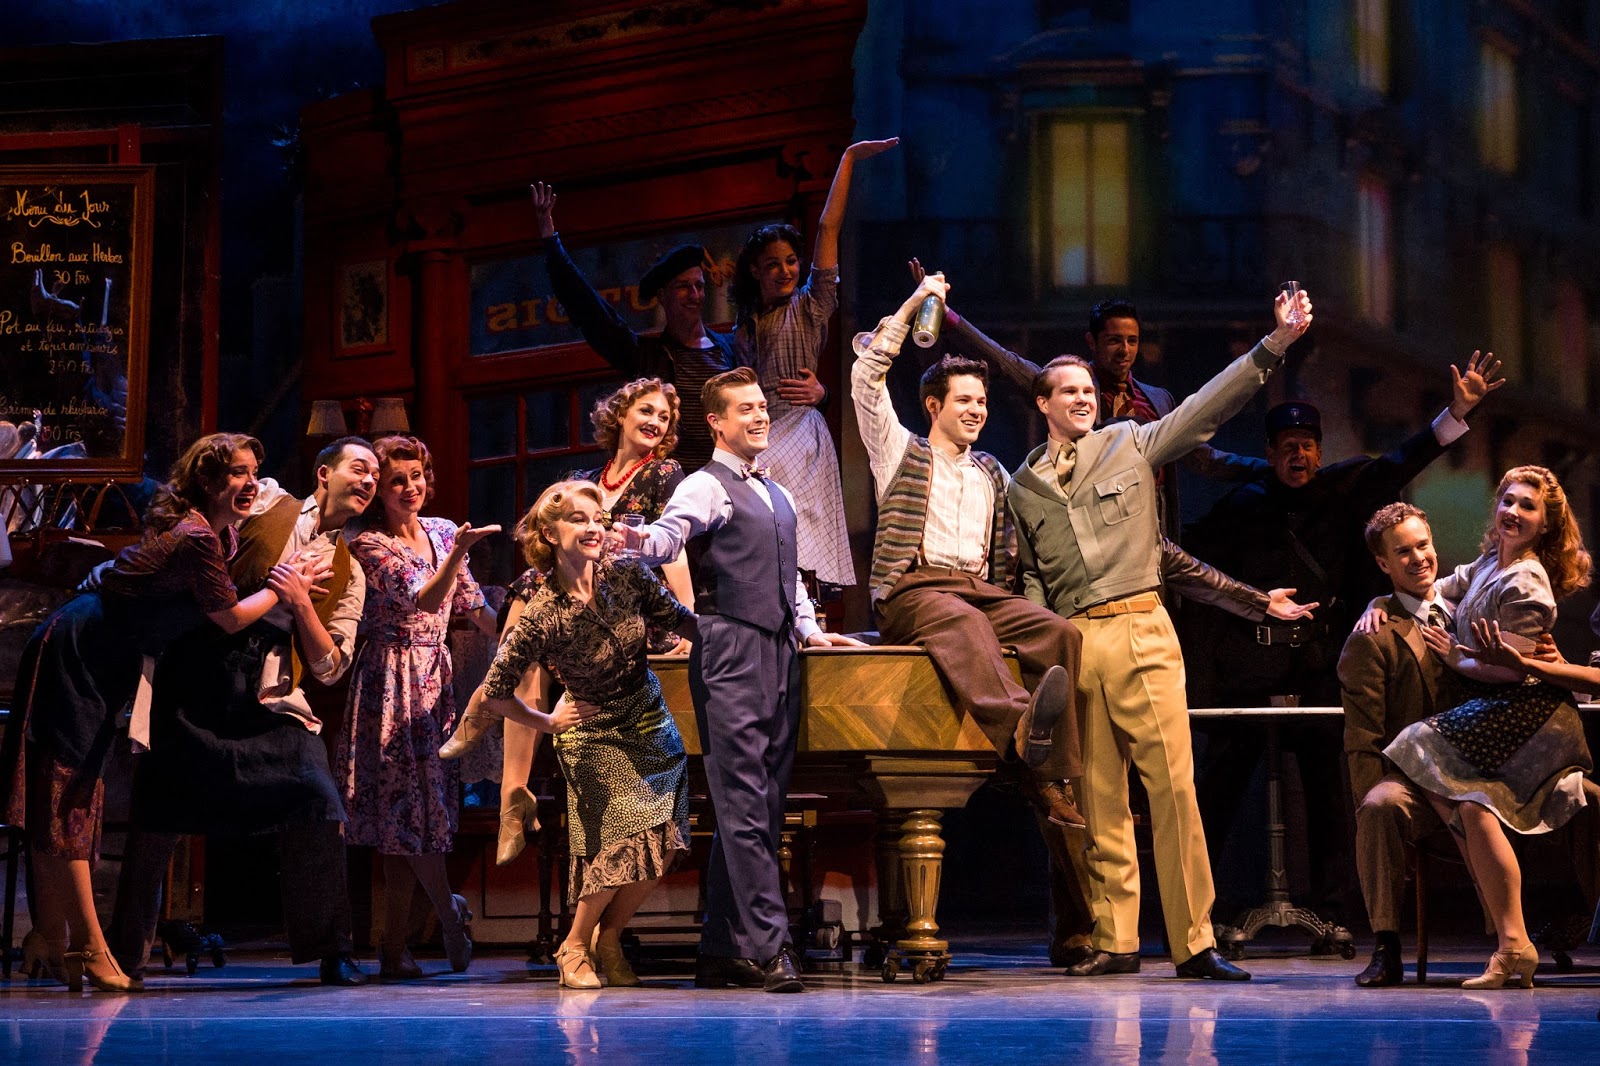 Upcoming: An American in Paris, November 28-December 10, at the Detroit Opera House